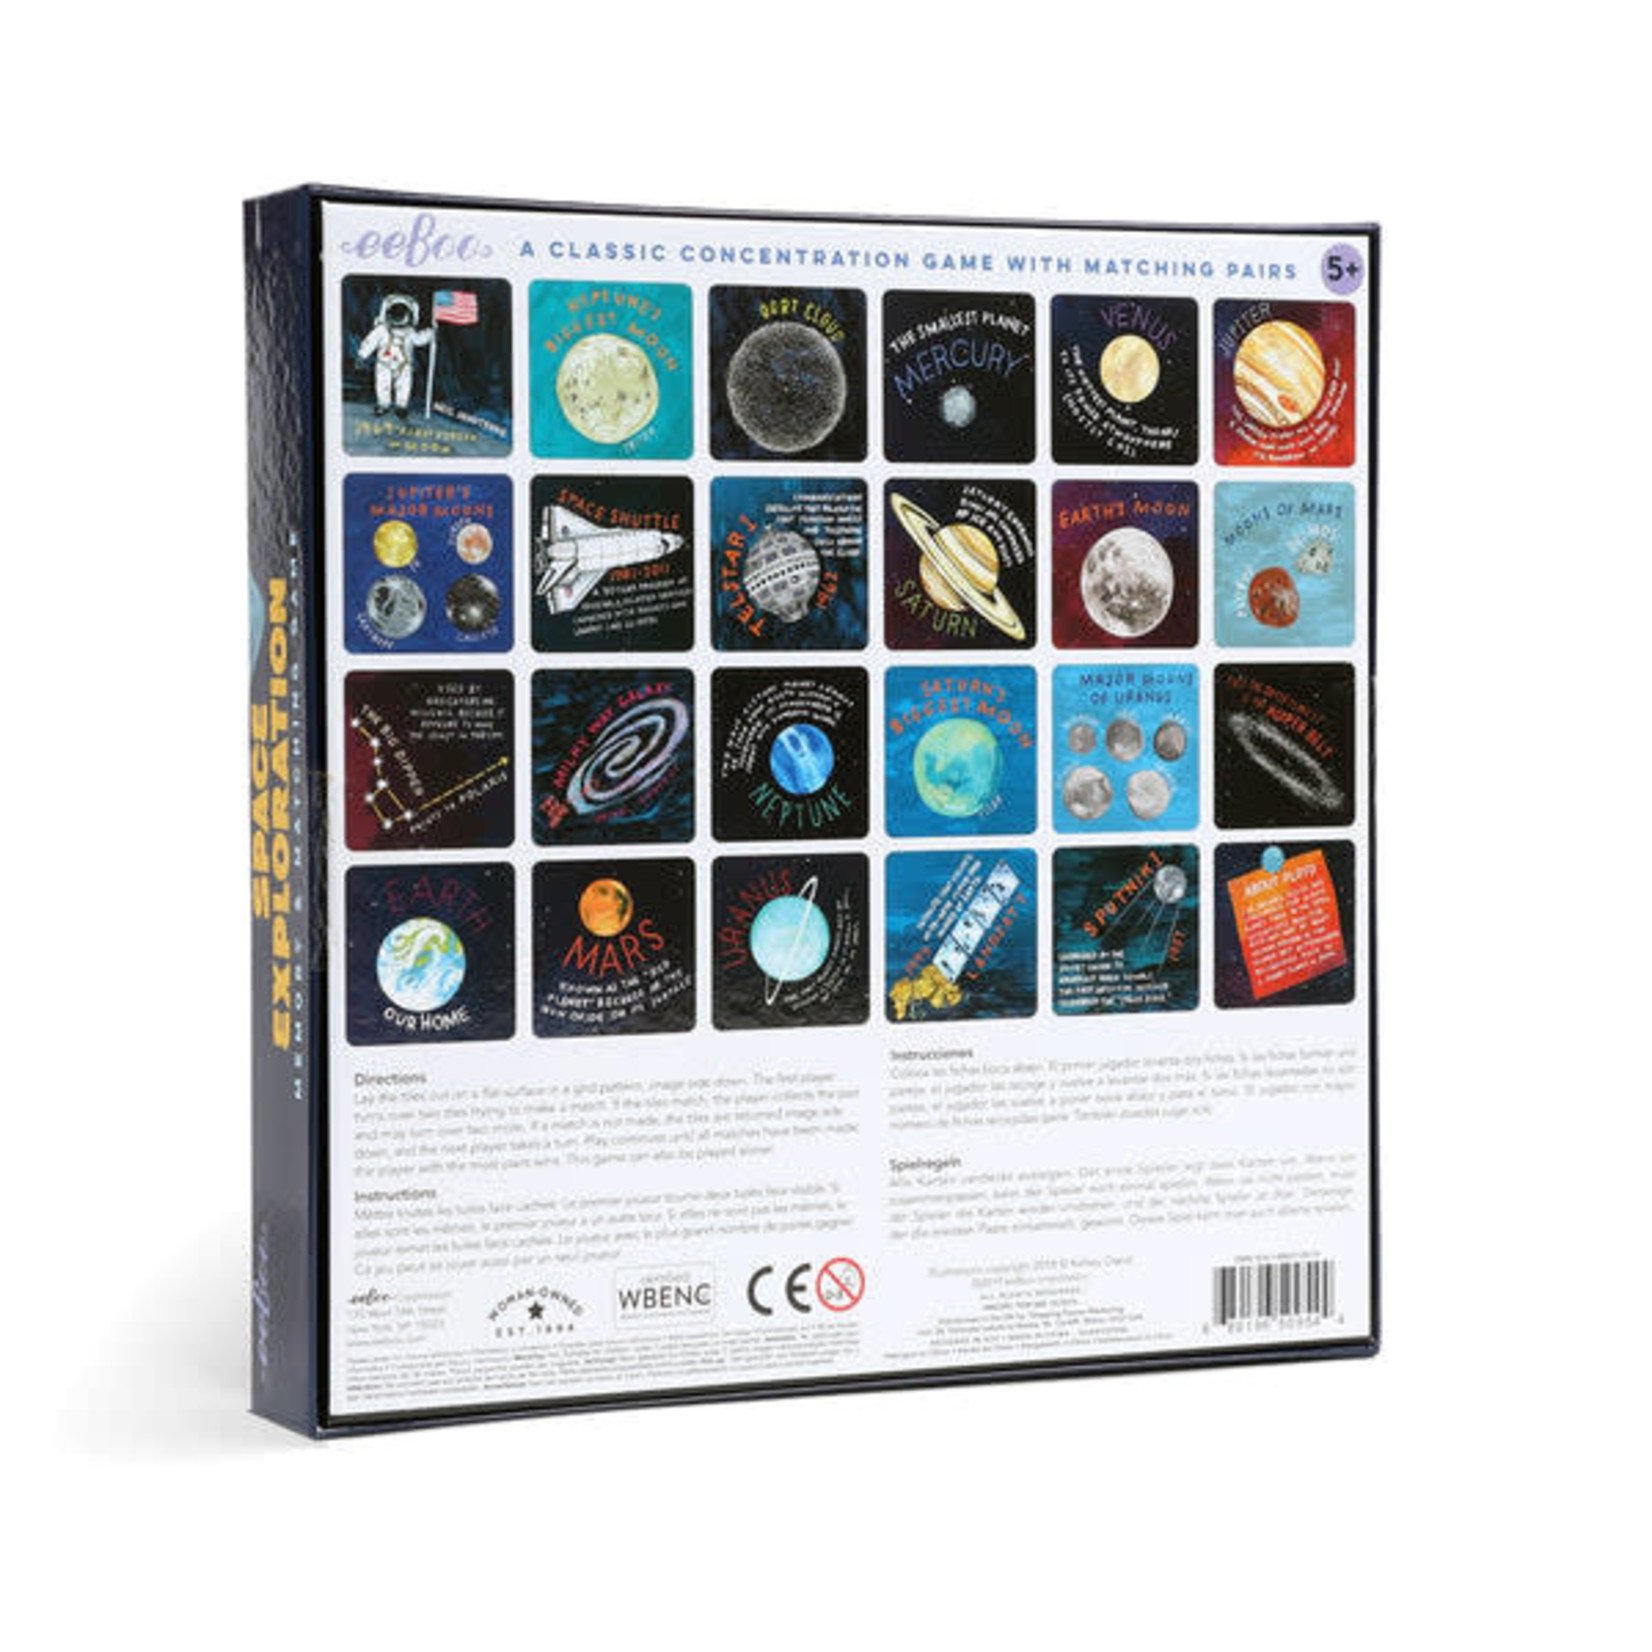 eeboo Space Exploration Memory Matching Game